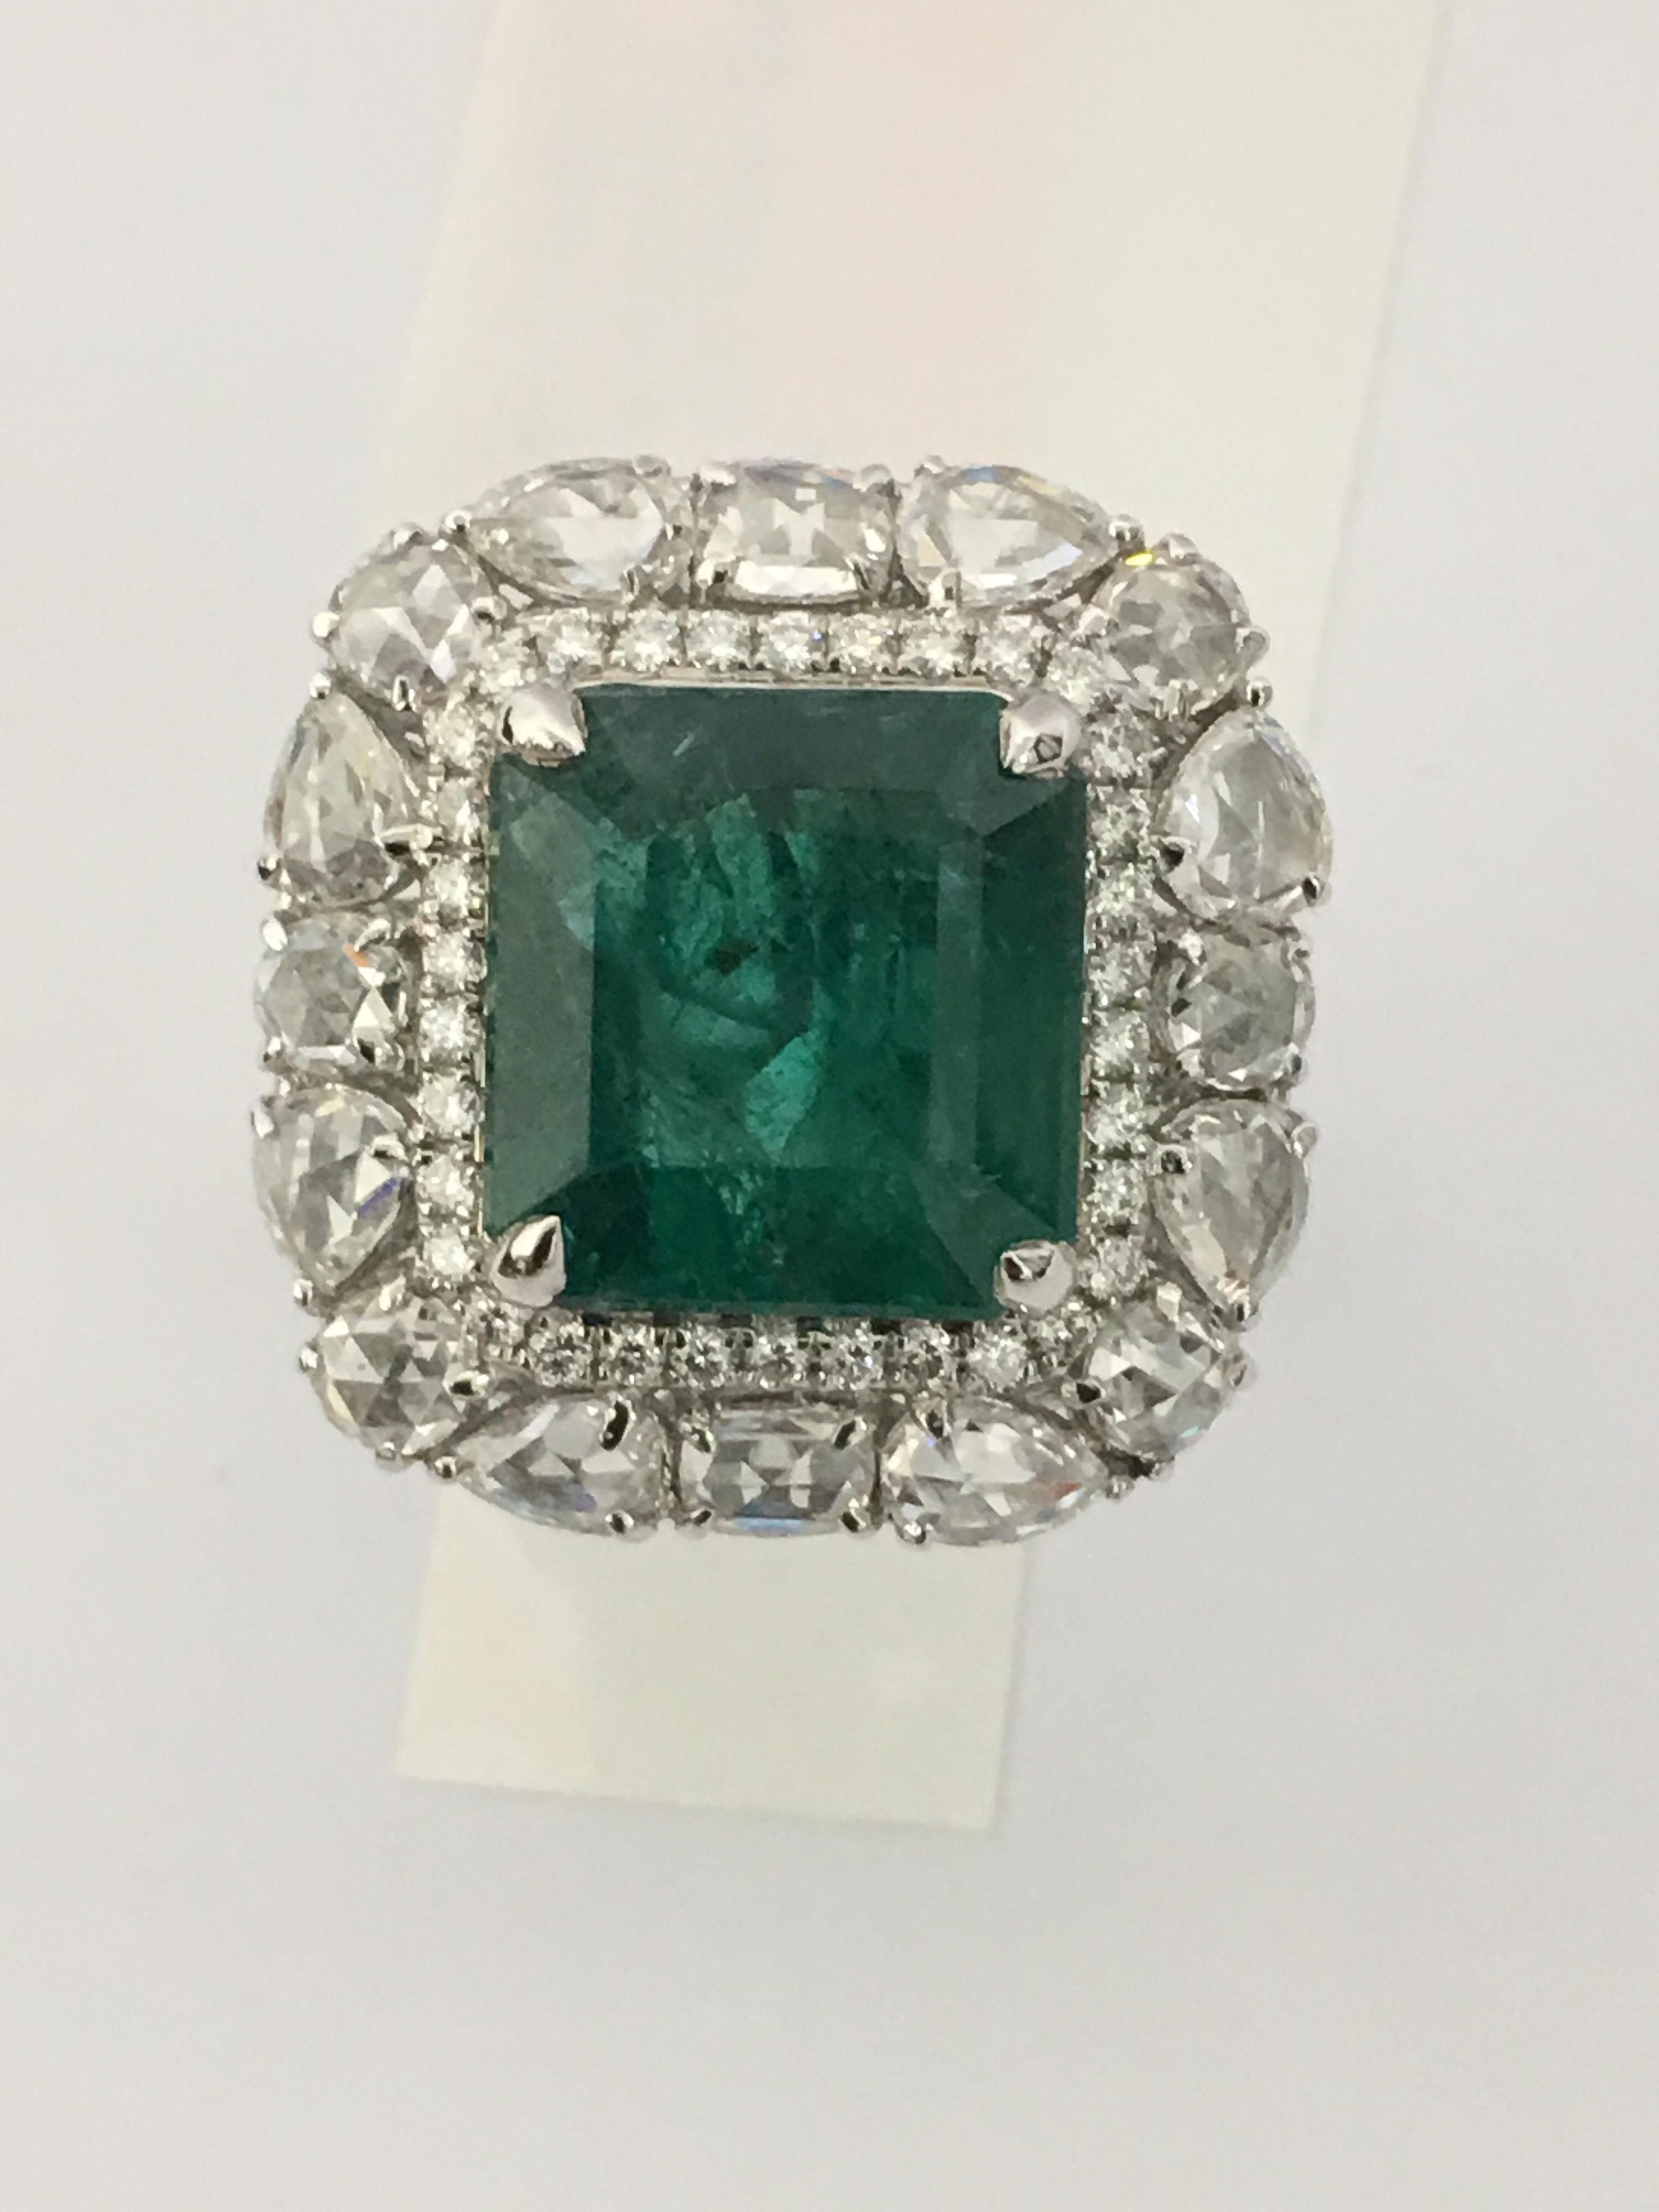 Natural square Emerald  weigh 6.54 Carat and 3.32 Carat Diamonds full cut round and rose cut .
Quality of Emerald is exceptional. Very less inclusion.
The Ring is set in 18 Karat White Gold.
Size of the Ring is 7.5 ( can be resized)
The ring is